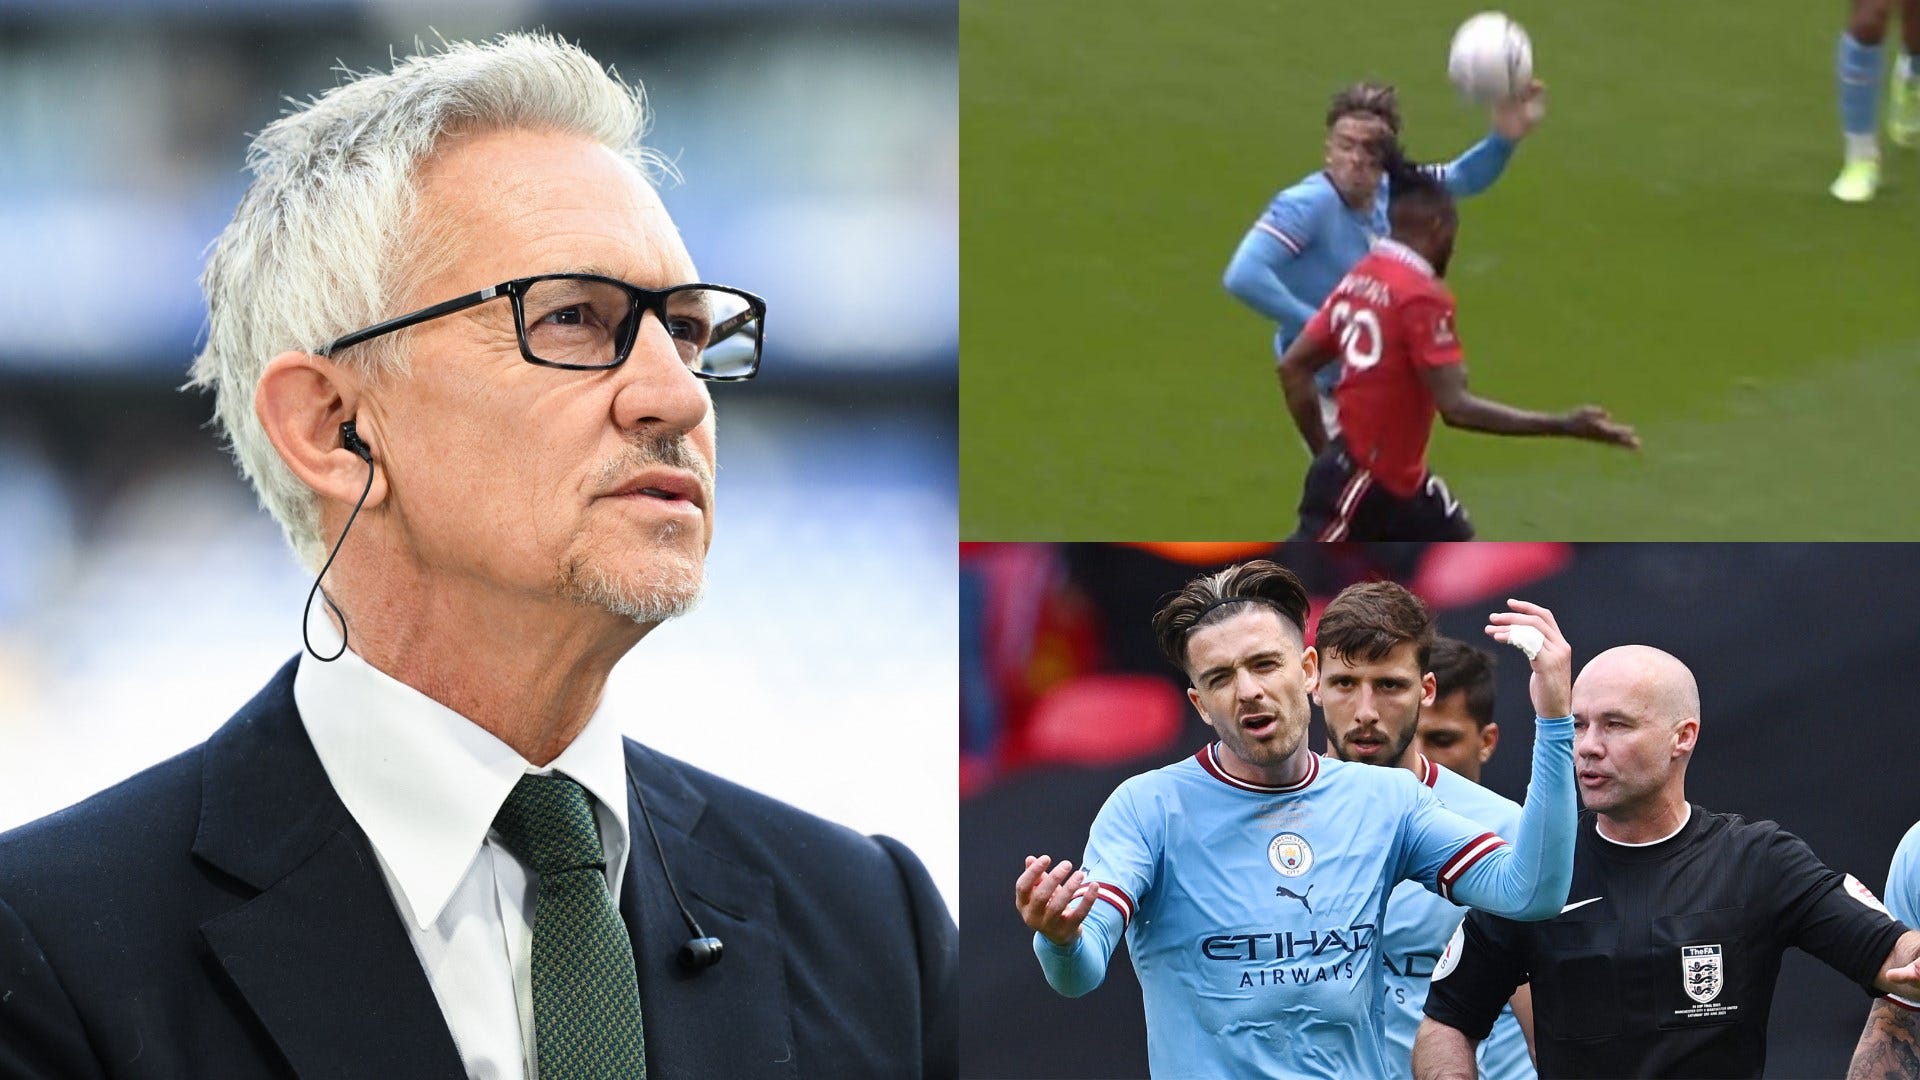 Gary Lineker makes big handball claim on live TV as BBC presenter suggests imminent law change is coming after FA Cup final controversy Goal US